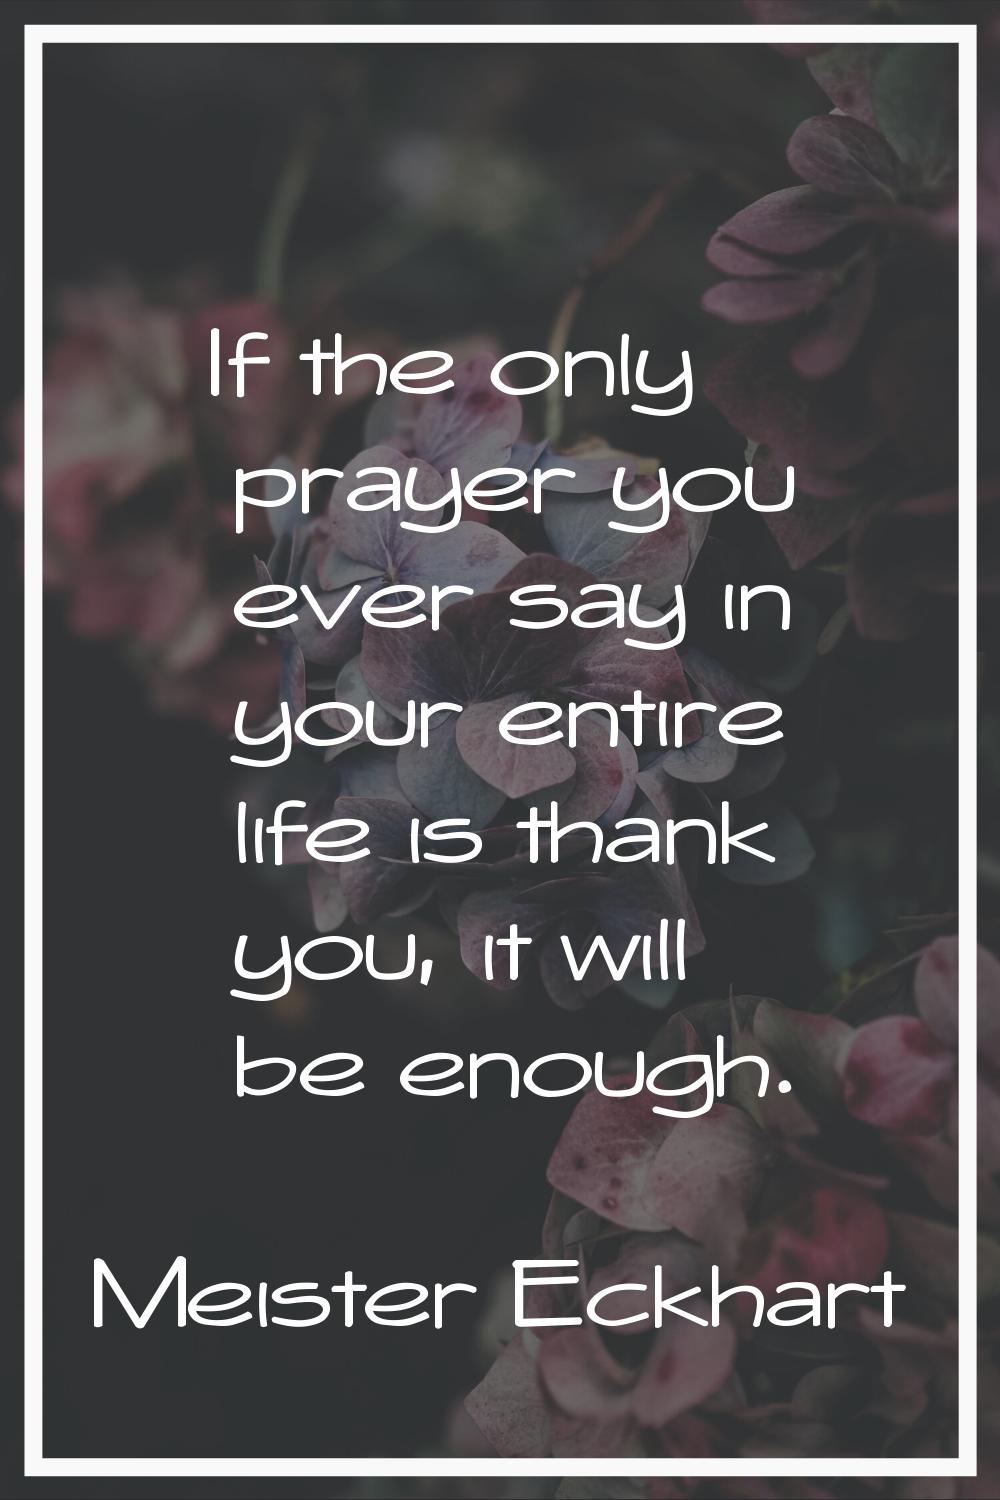 If the only prayer you ever say in your entire life is thank you, it will be enough.